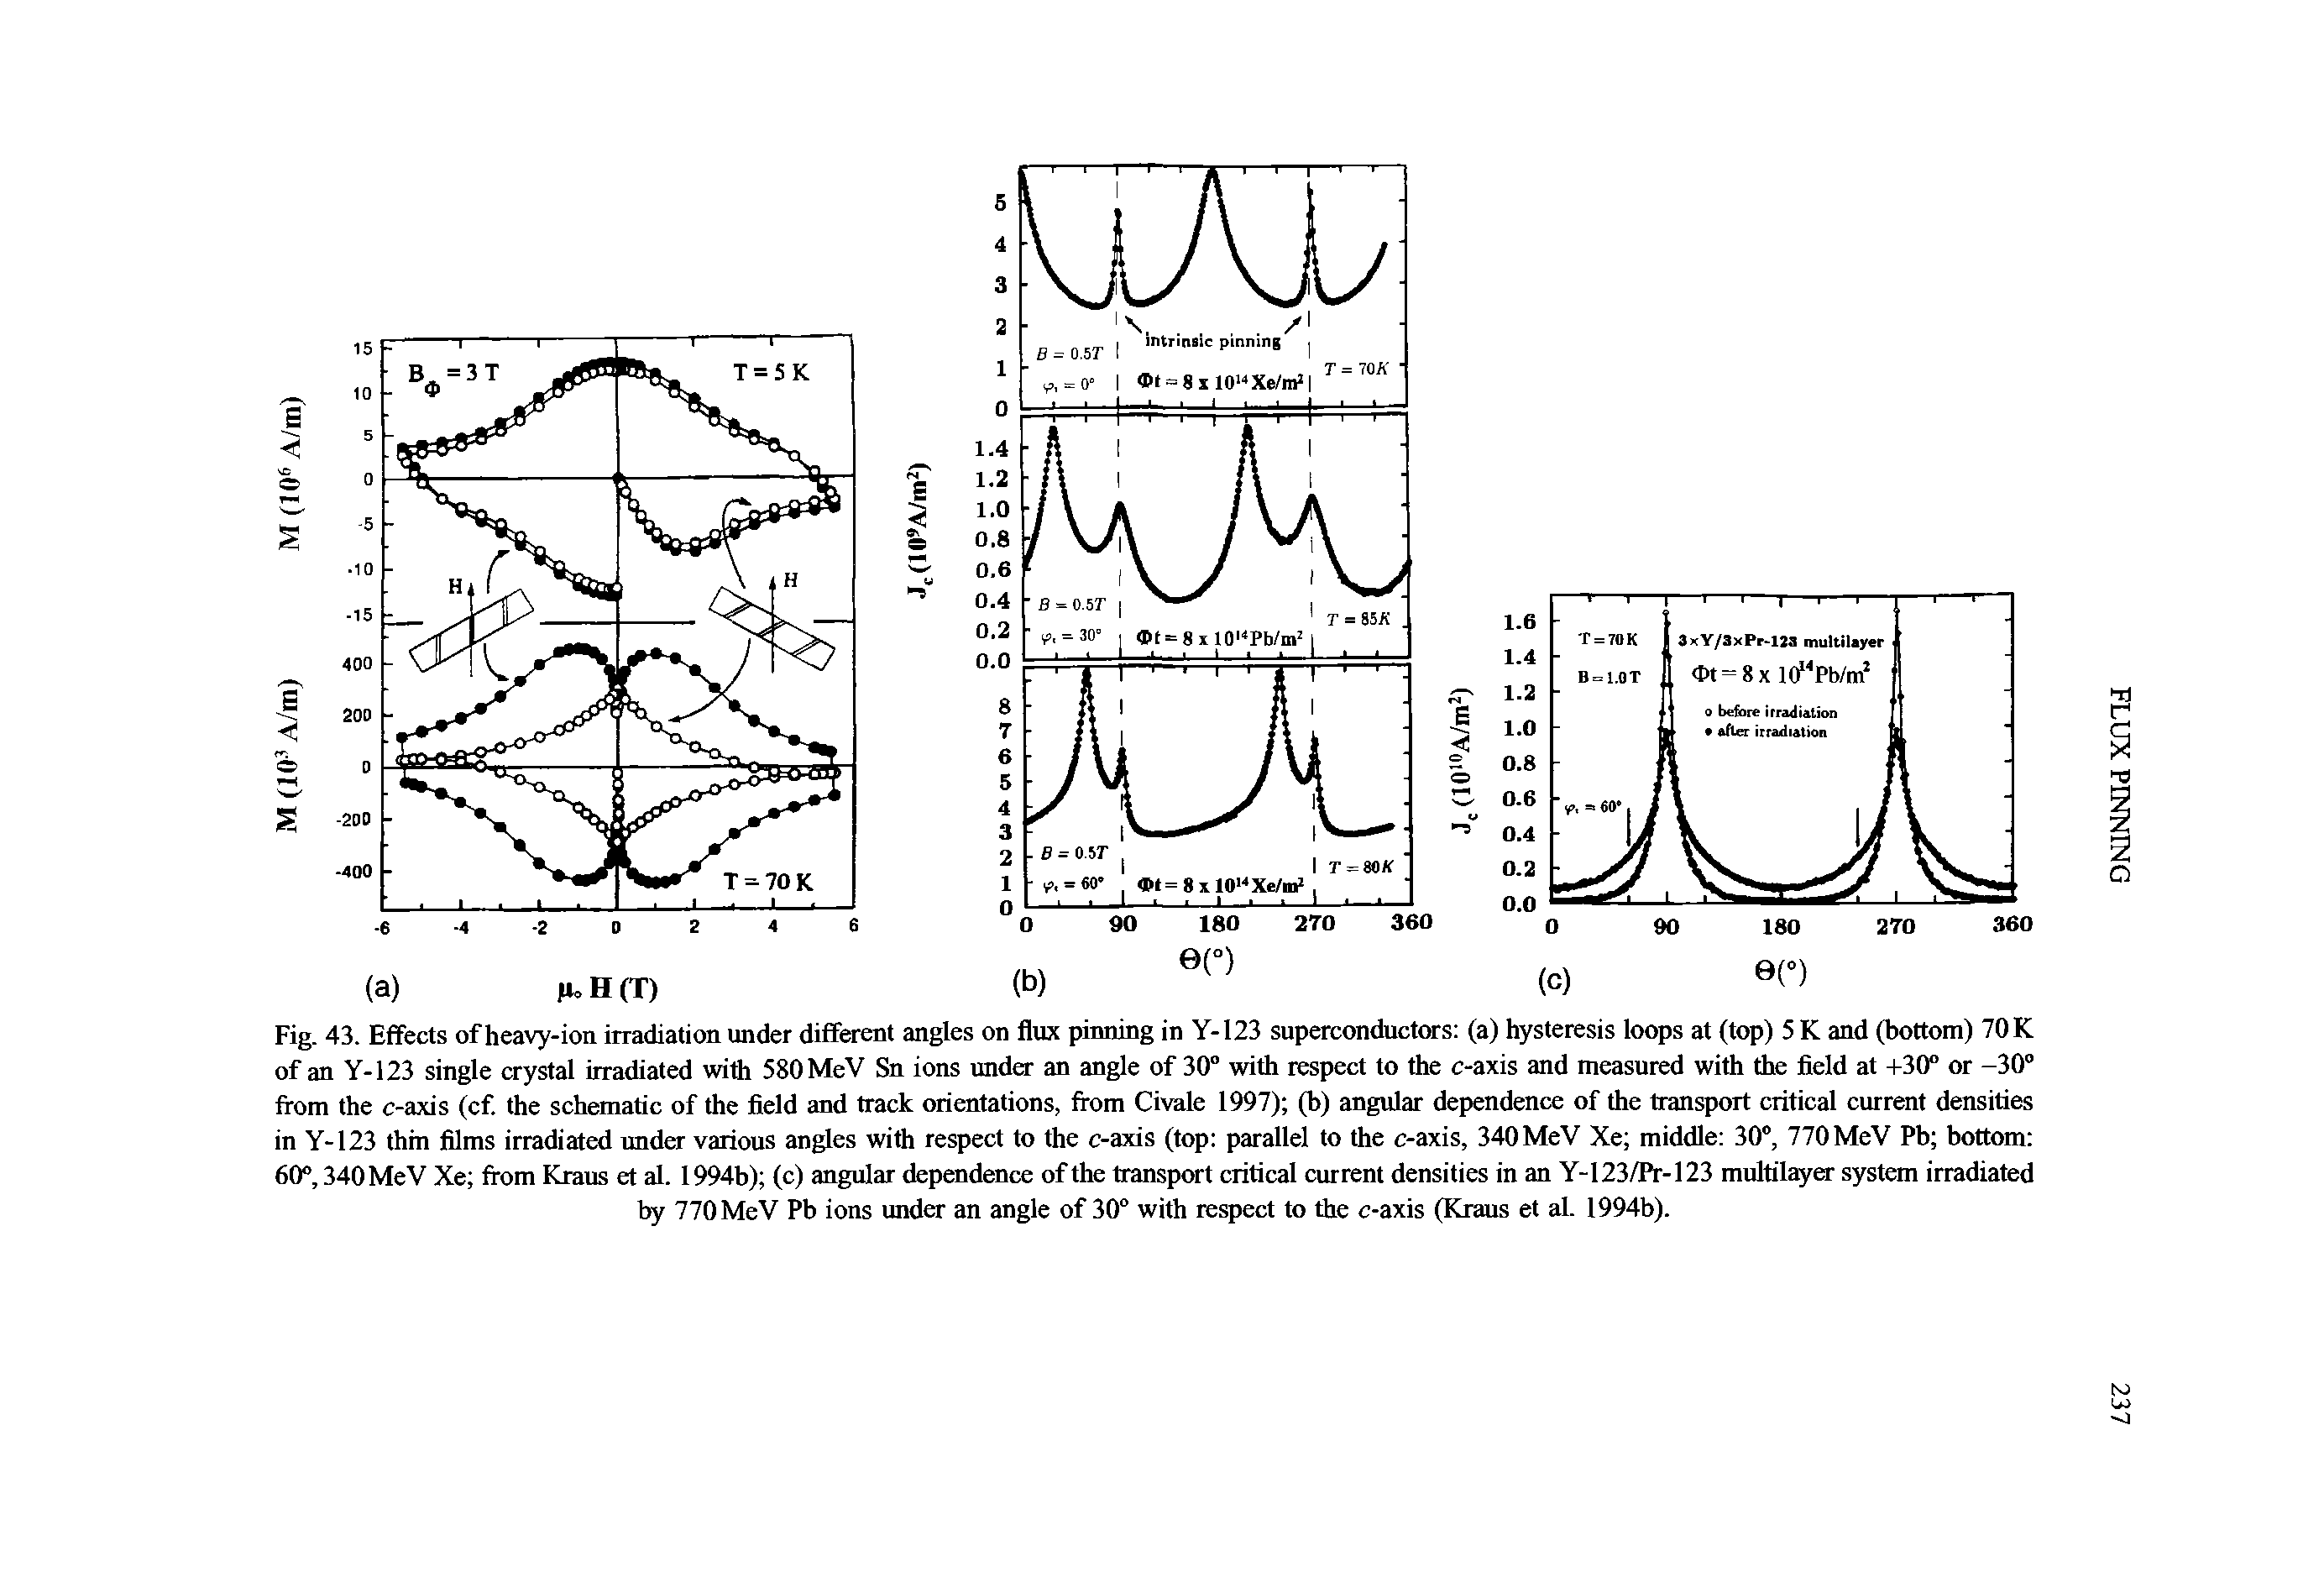 Fig. 43. Effects of heavy-ion irradiation under different angles on flux pinning in Y-I23 superconductors (a) hysteresis loops at (top) 5 K and (bottom) 70 K of an Y-123 single crystal irradiated with 580 MeV Sn ions under an angle of 30° with respect to the c-axis and measured with the field at +30° or -30° from the c-axis (cf. the schematic of the field and track orientations, from Civale 1997) (b) angular dependence of the transport critical current densities in Y-123 thin films irradiated under various angles with respect to the c-axis (top parallel to the c-axis, 340 MeV Xe middle 30°, 770 MeV Pb bottom 60°, 340 MeV Xe from Kraus et al. 1994b) (c) angular dependence of the transport critical current densities in an Y-123/Pr-123 multilayer system irradiated by 770 MeV Pb ions under an angle of 30° with respect to the c-axis (Kraus et al. 1994b).